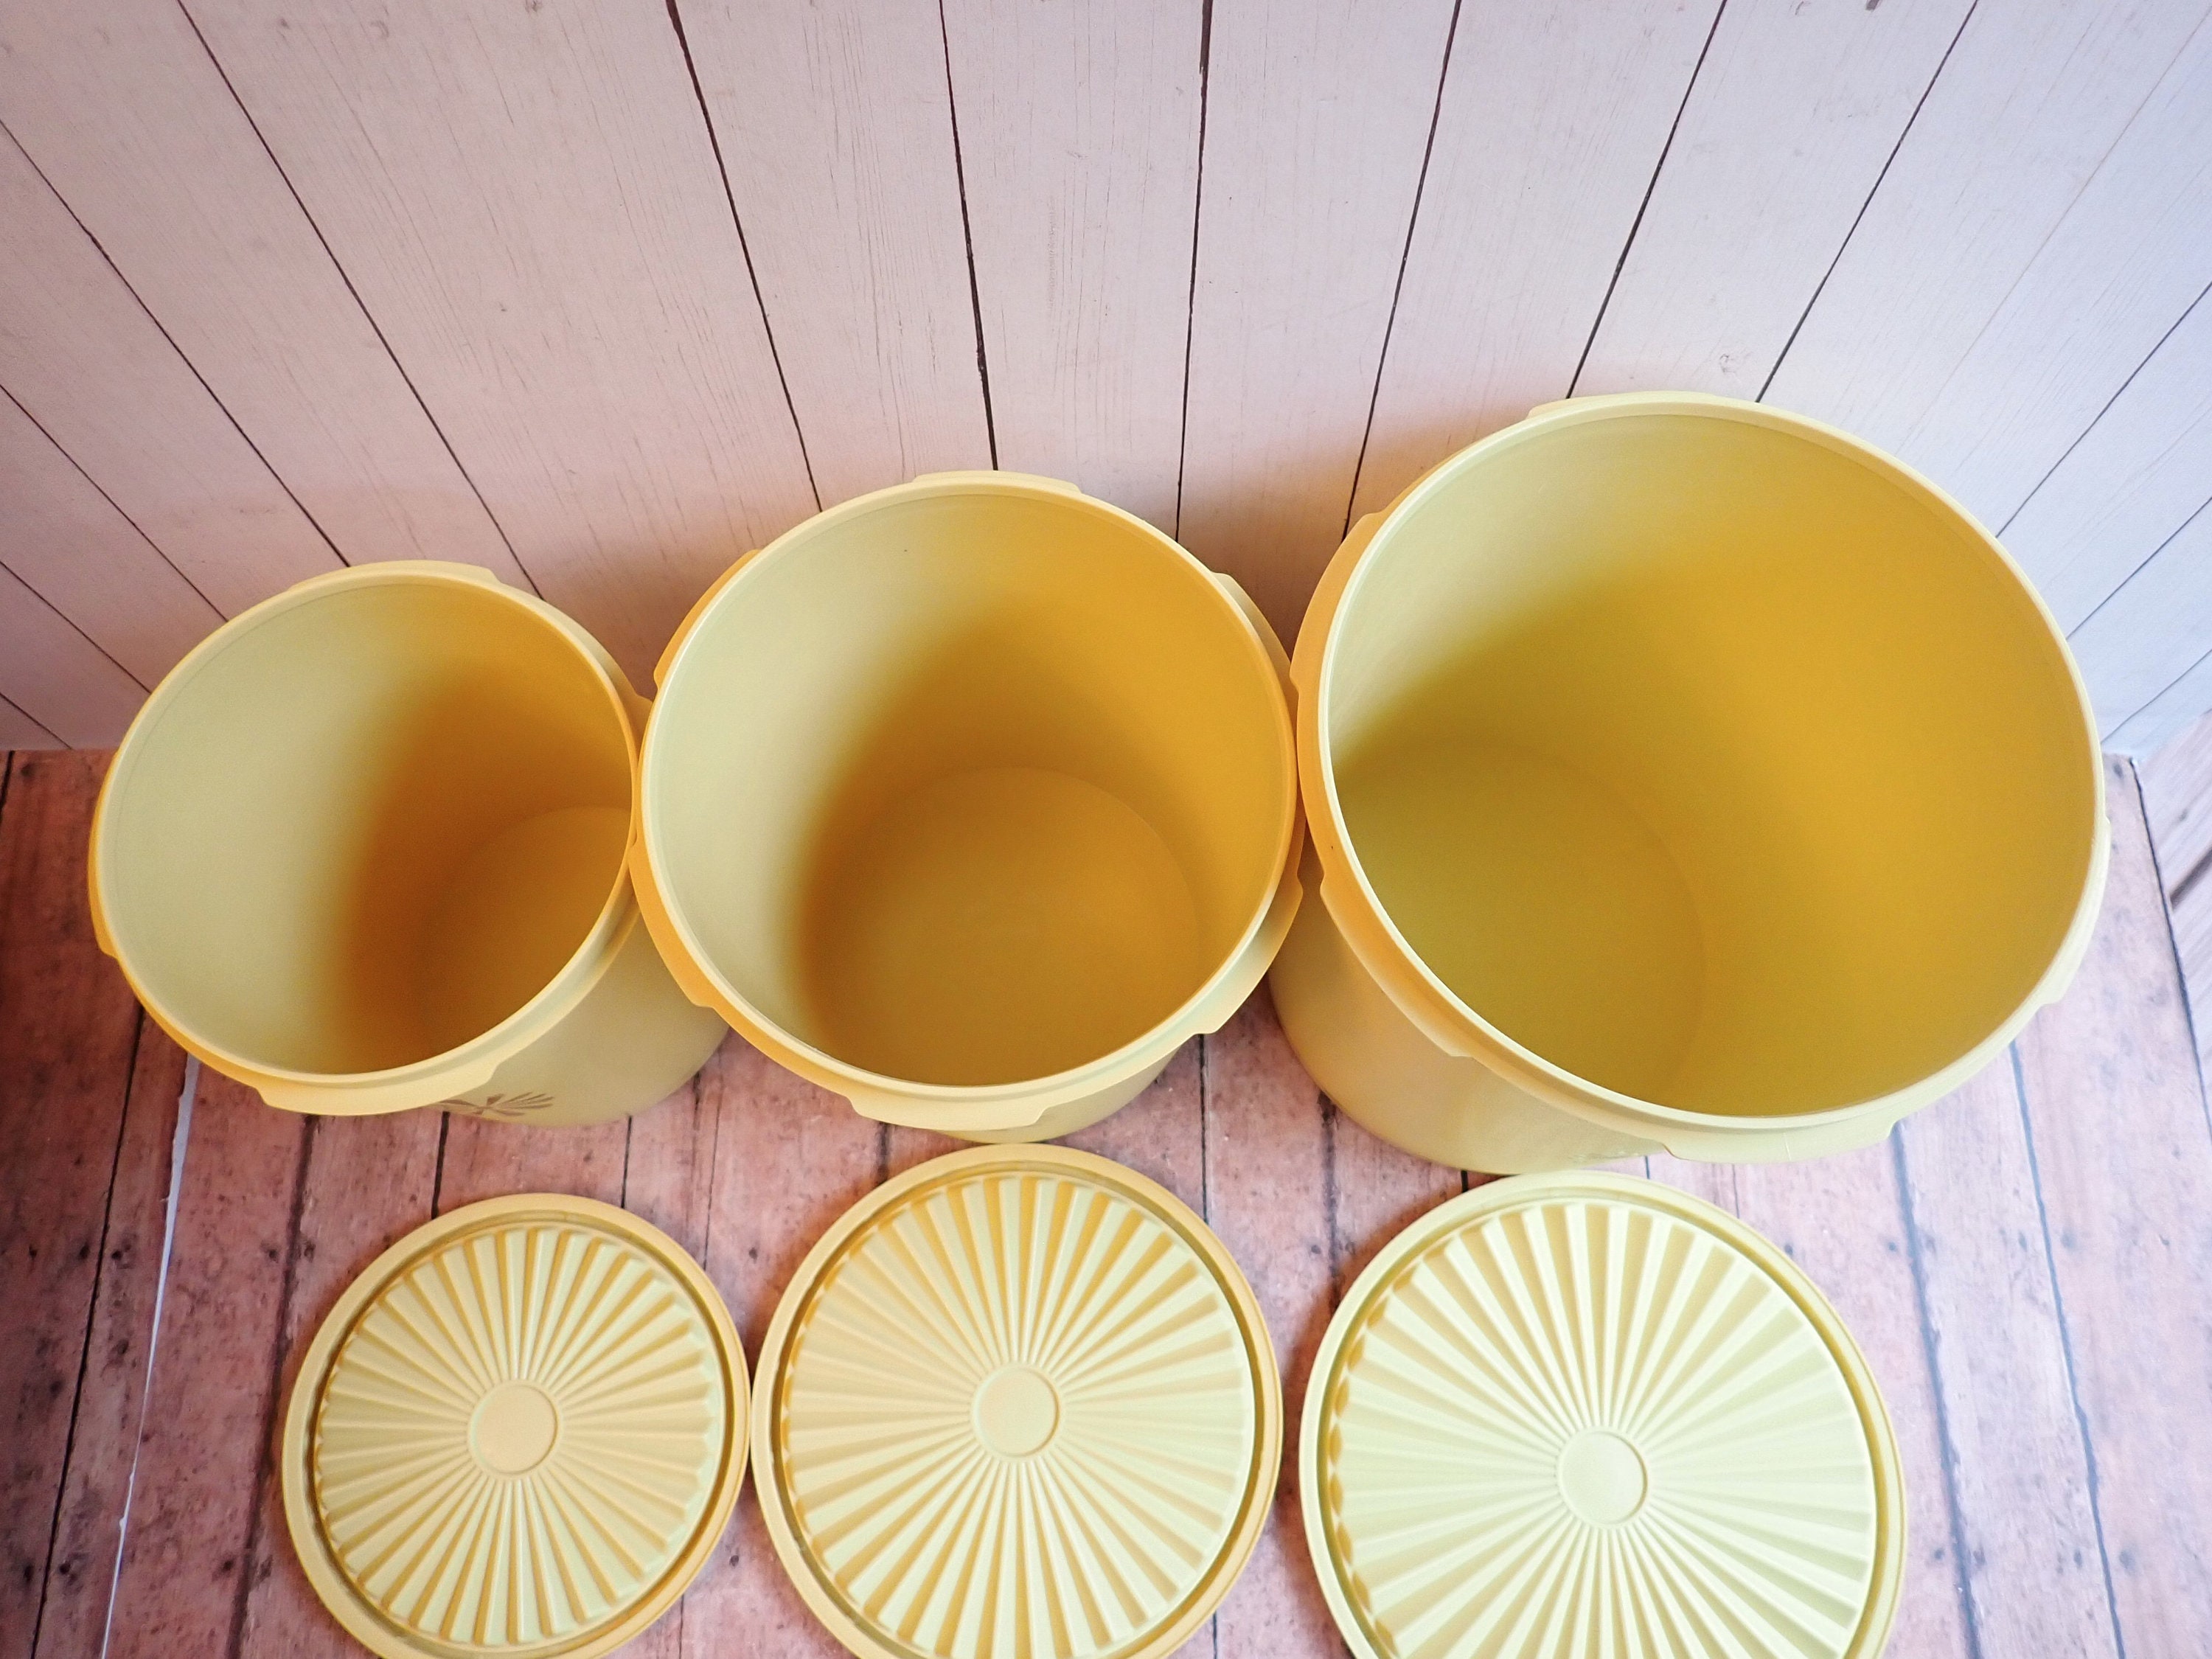 Vintage Tupperware Daffodil Yellow Mini Servalier Canisters- Set